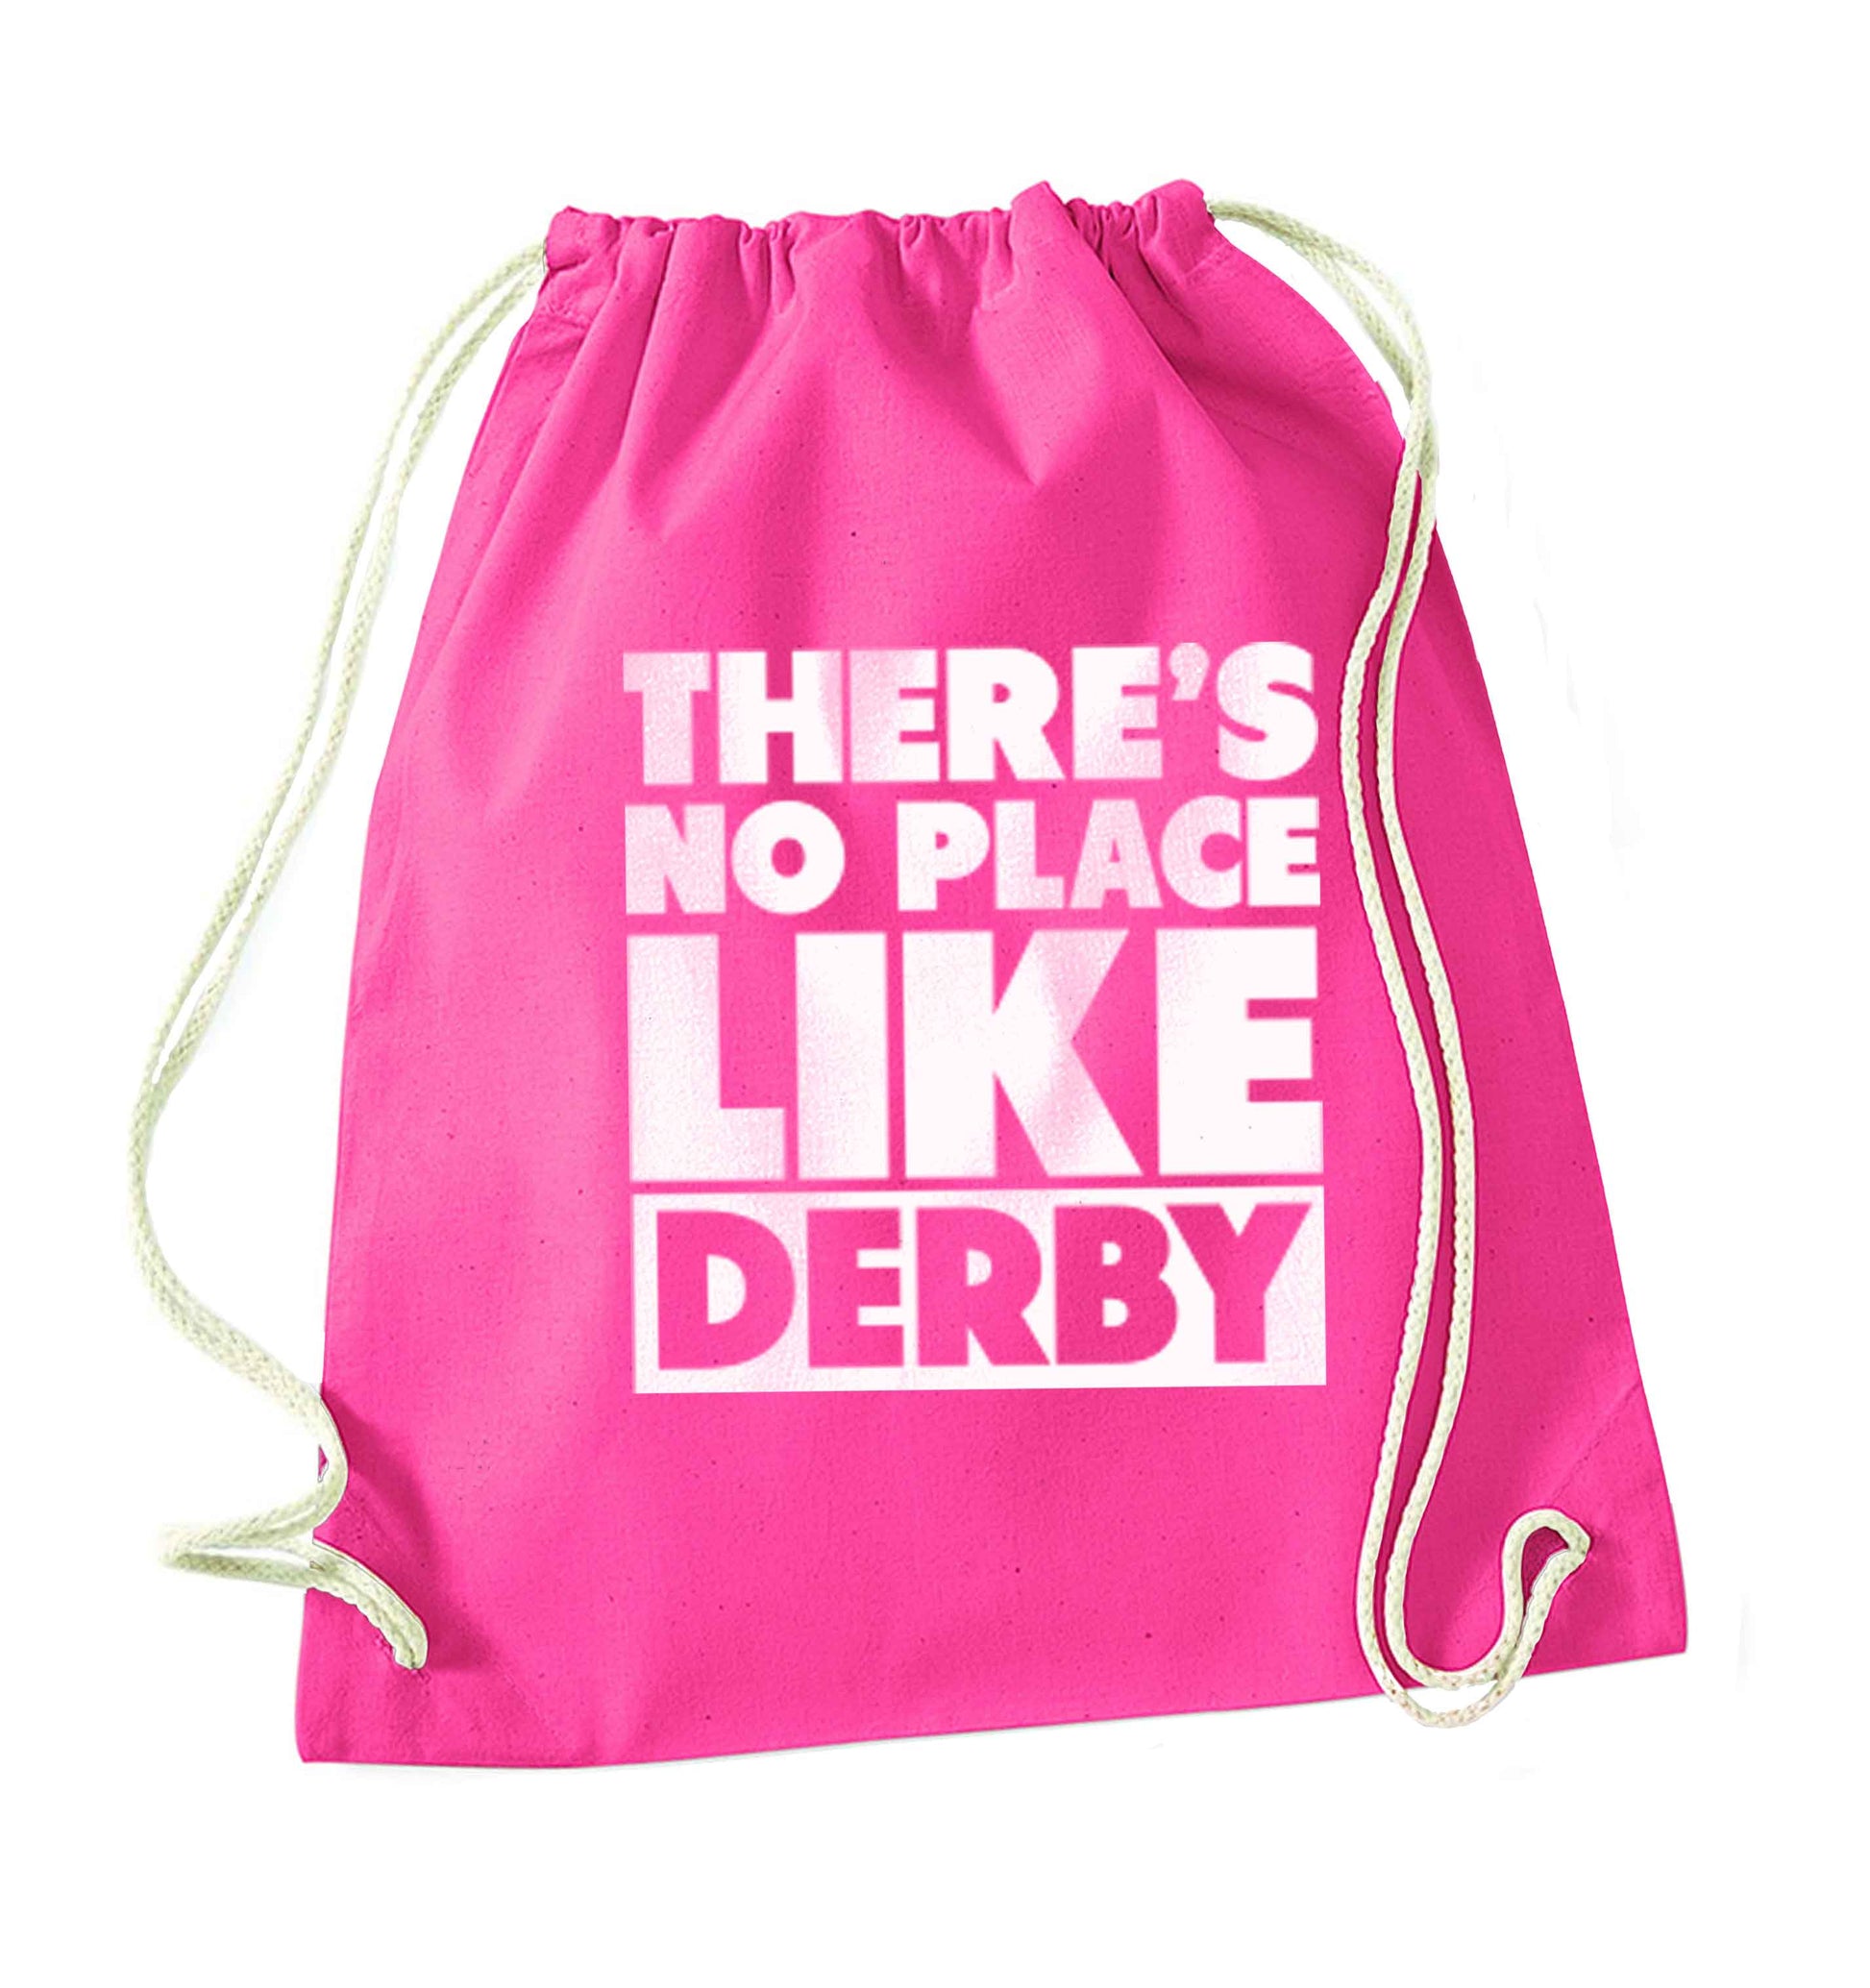 There's no place like Derby pink drawstring bag